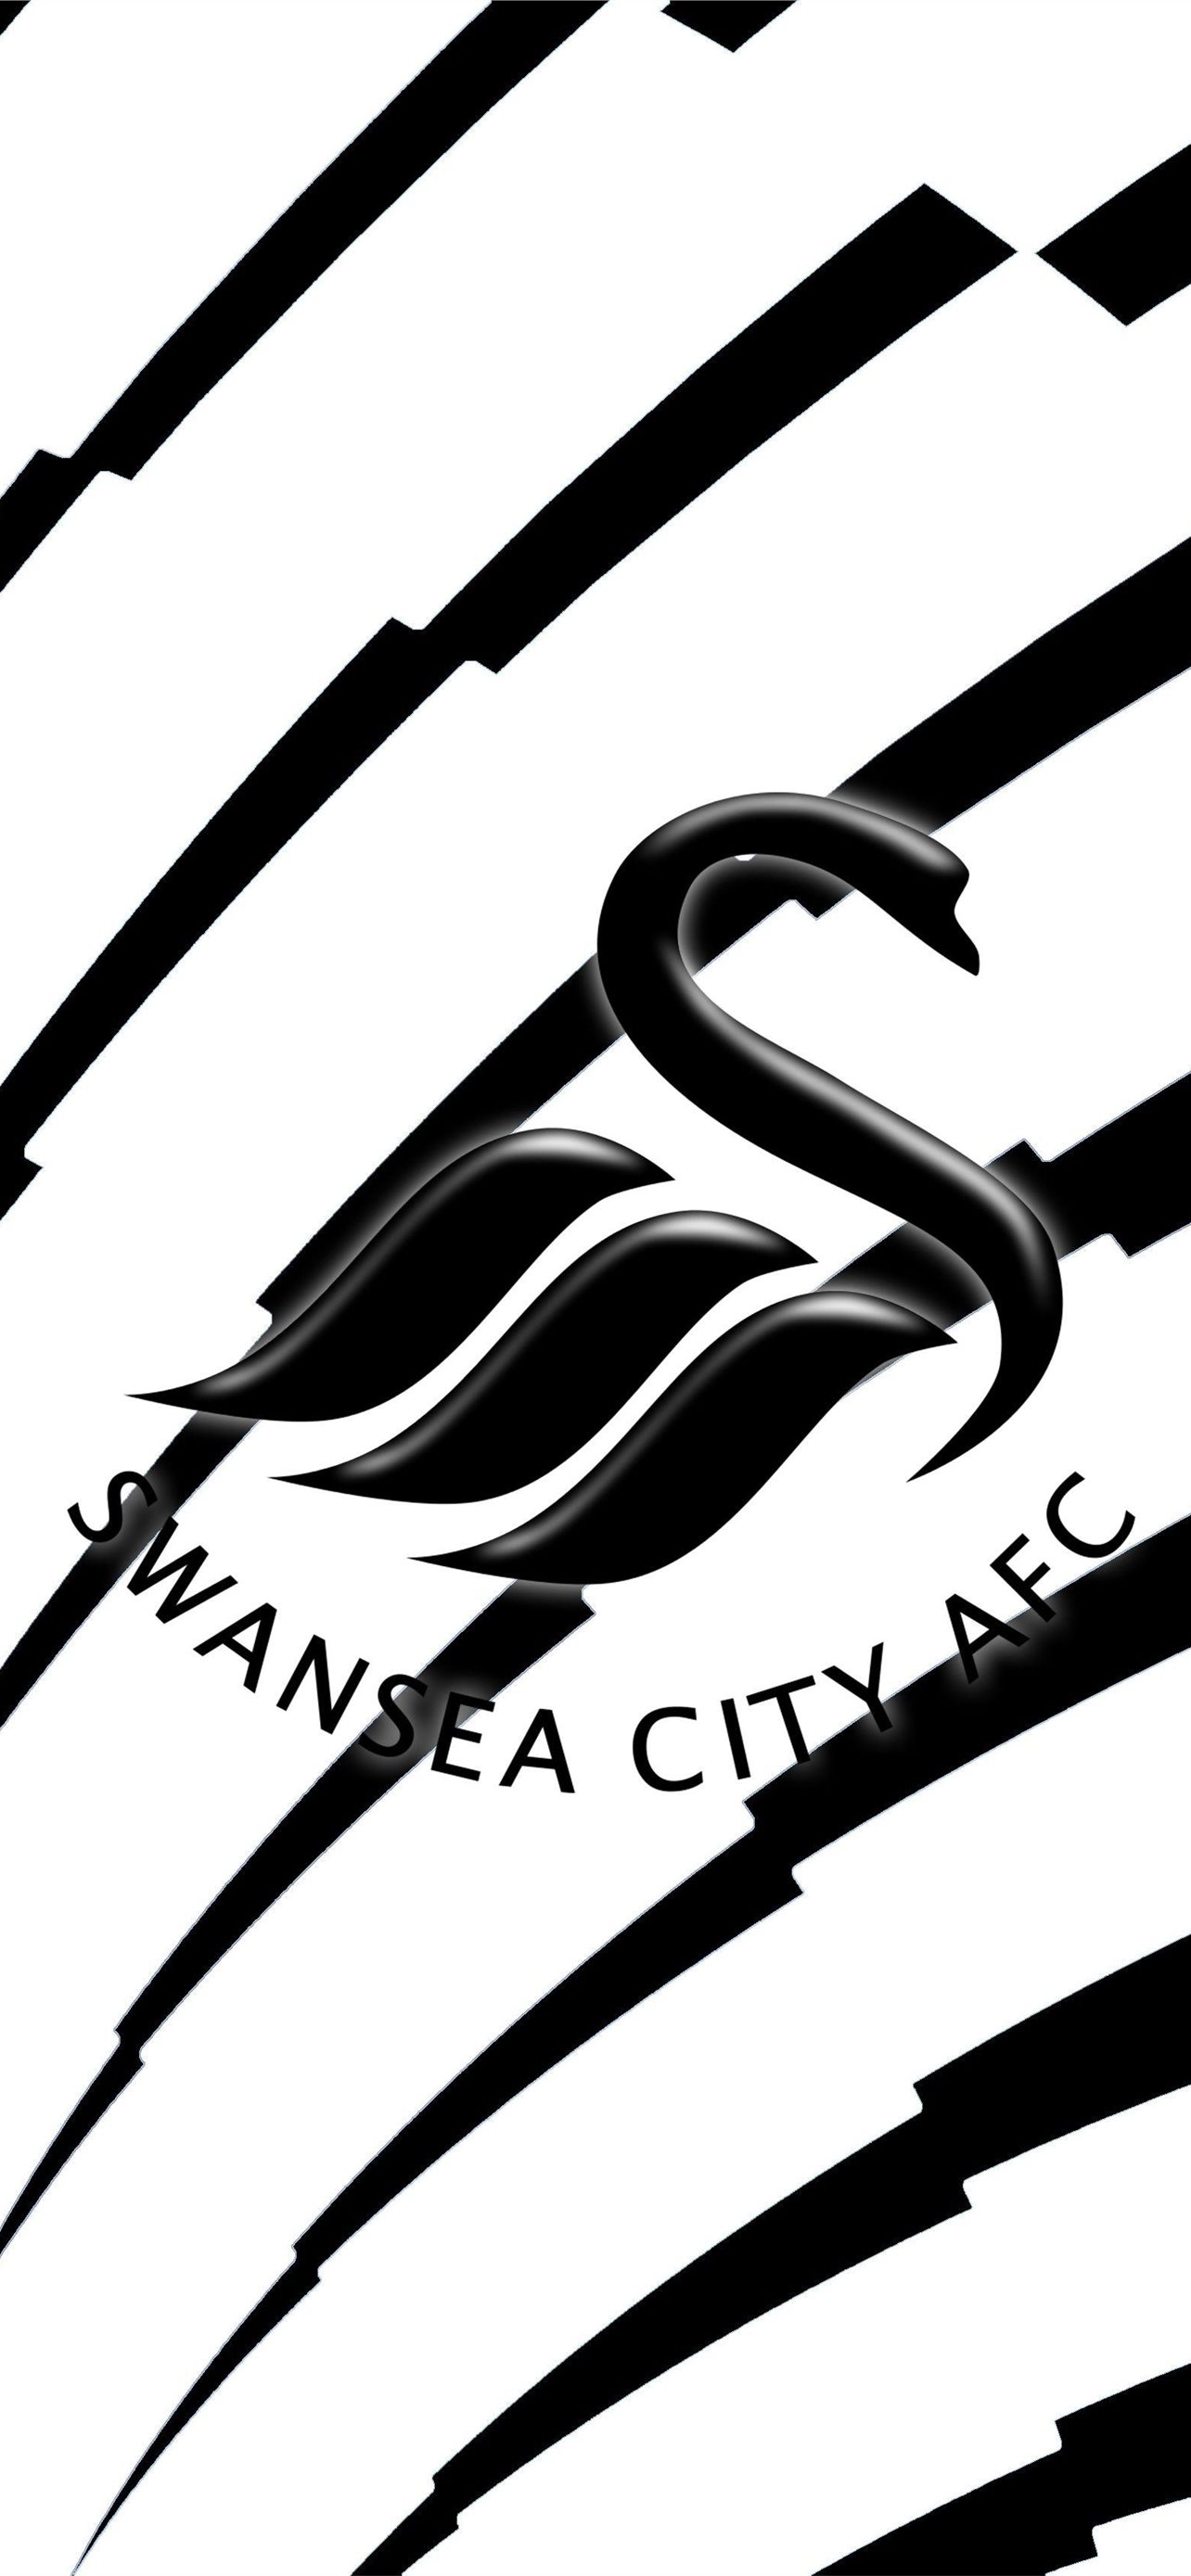 Cardiff City Phone Wallpapers - Wallpaper Cave